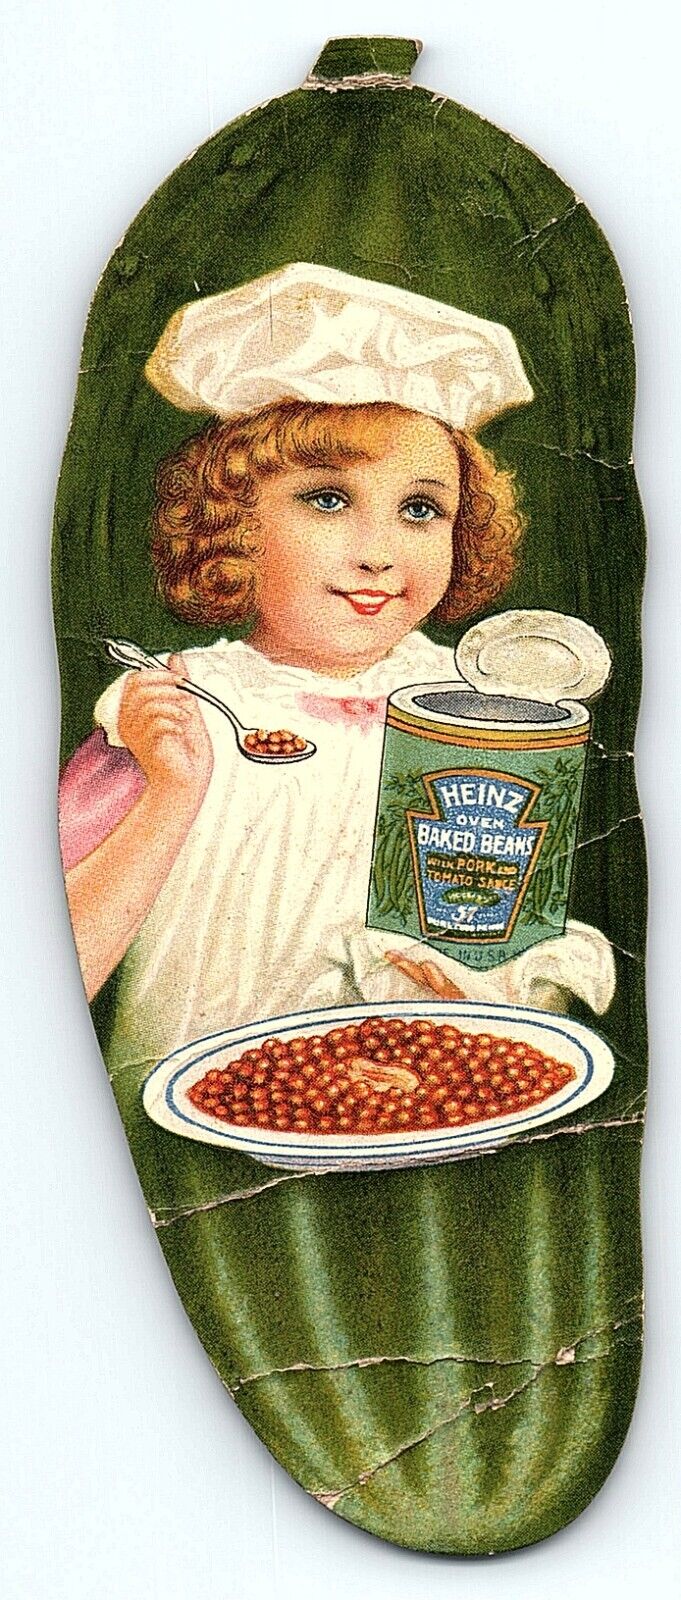 RARE EARLY HEINZ PICKLE TRADE CARD/BOOKMARK ADVERTISING HEINZ BAKED BEANS Z5536